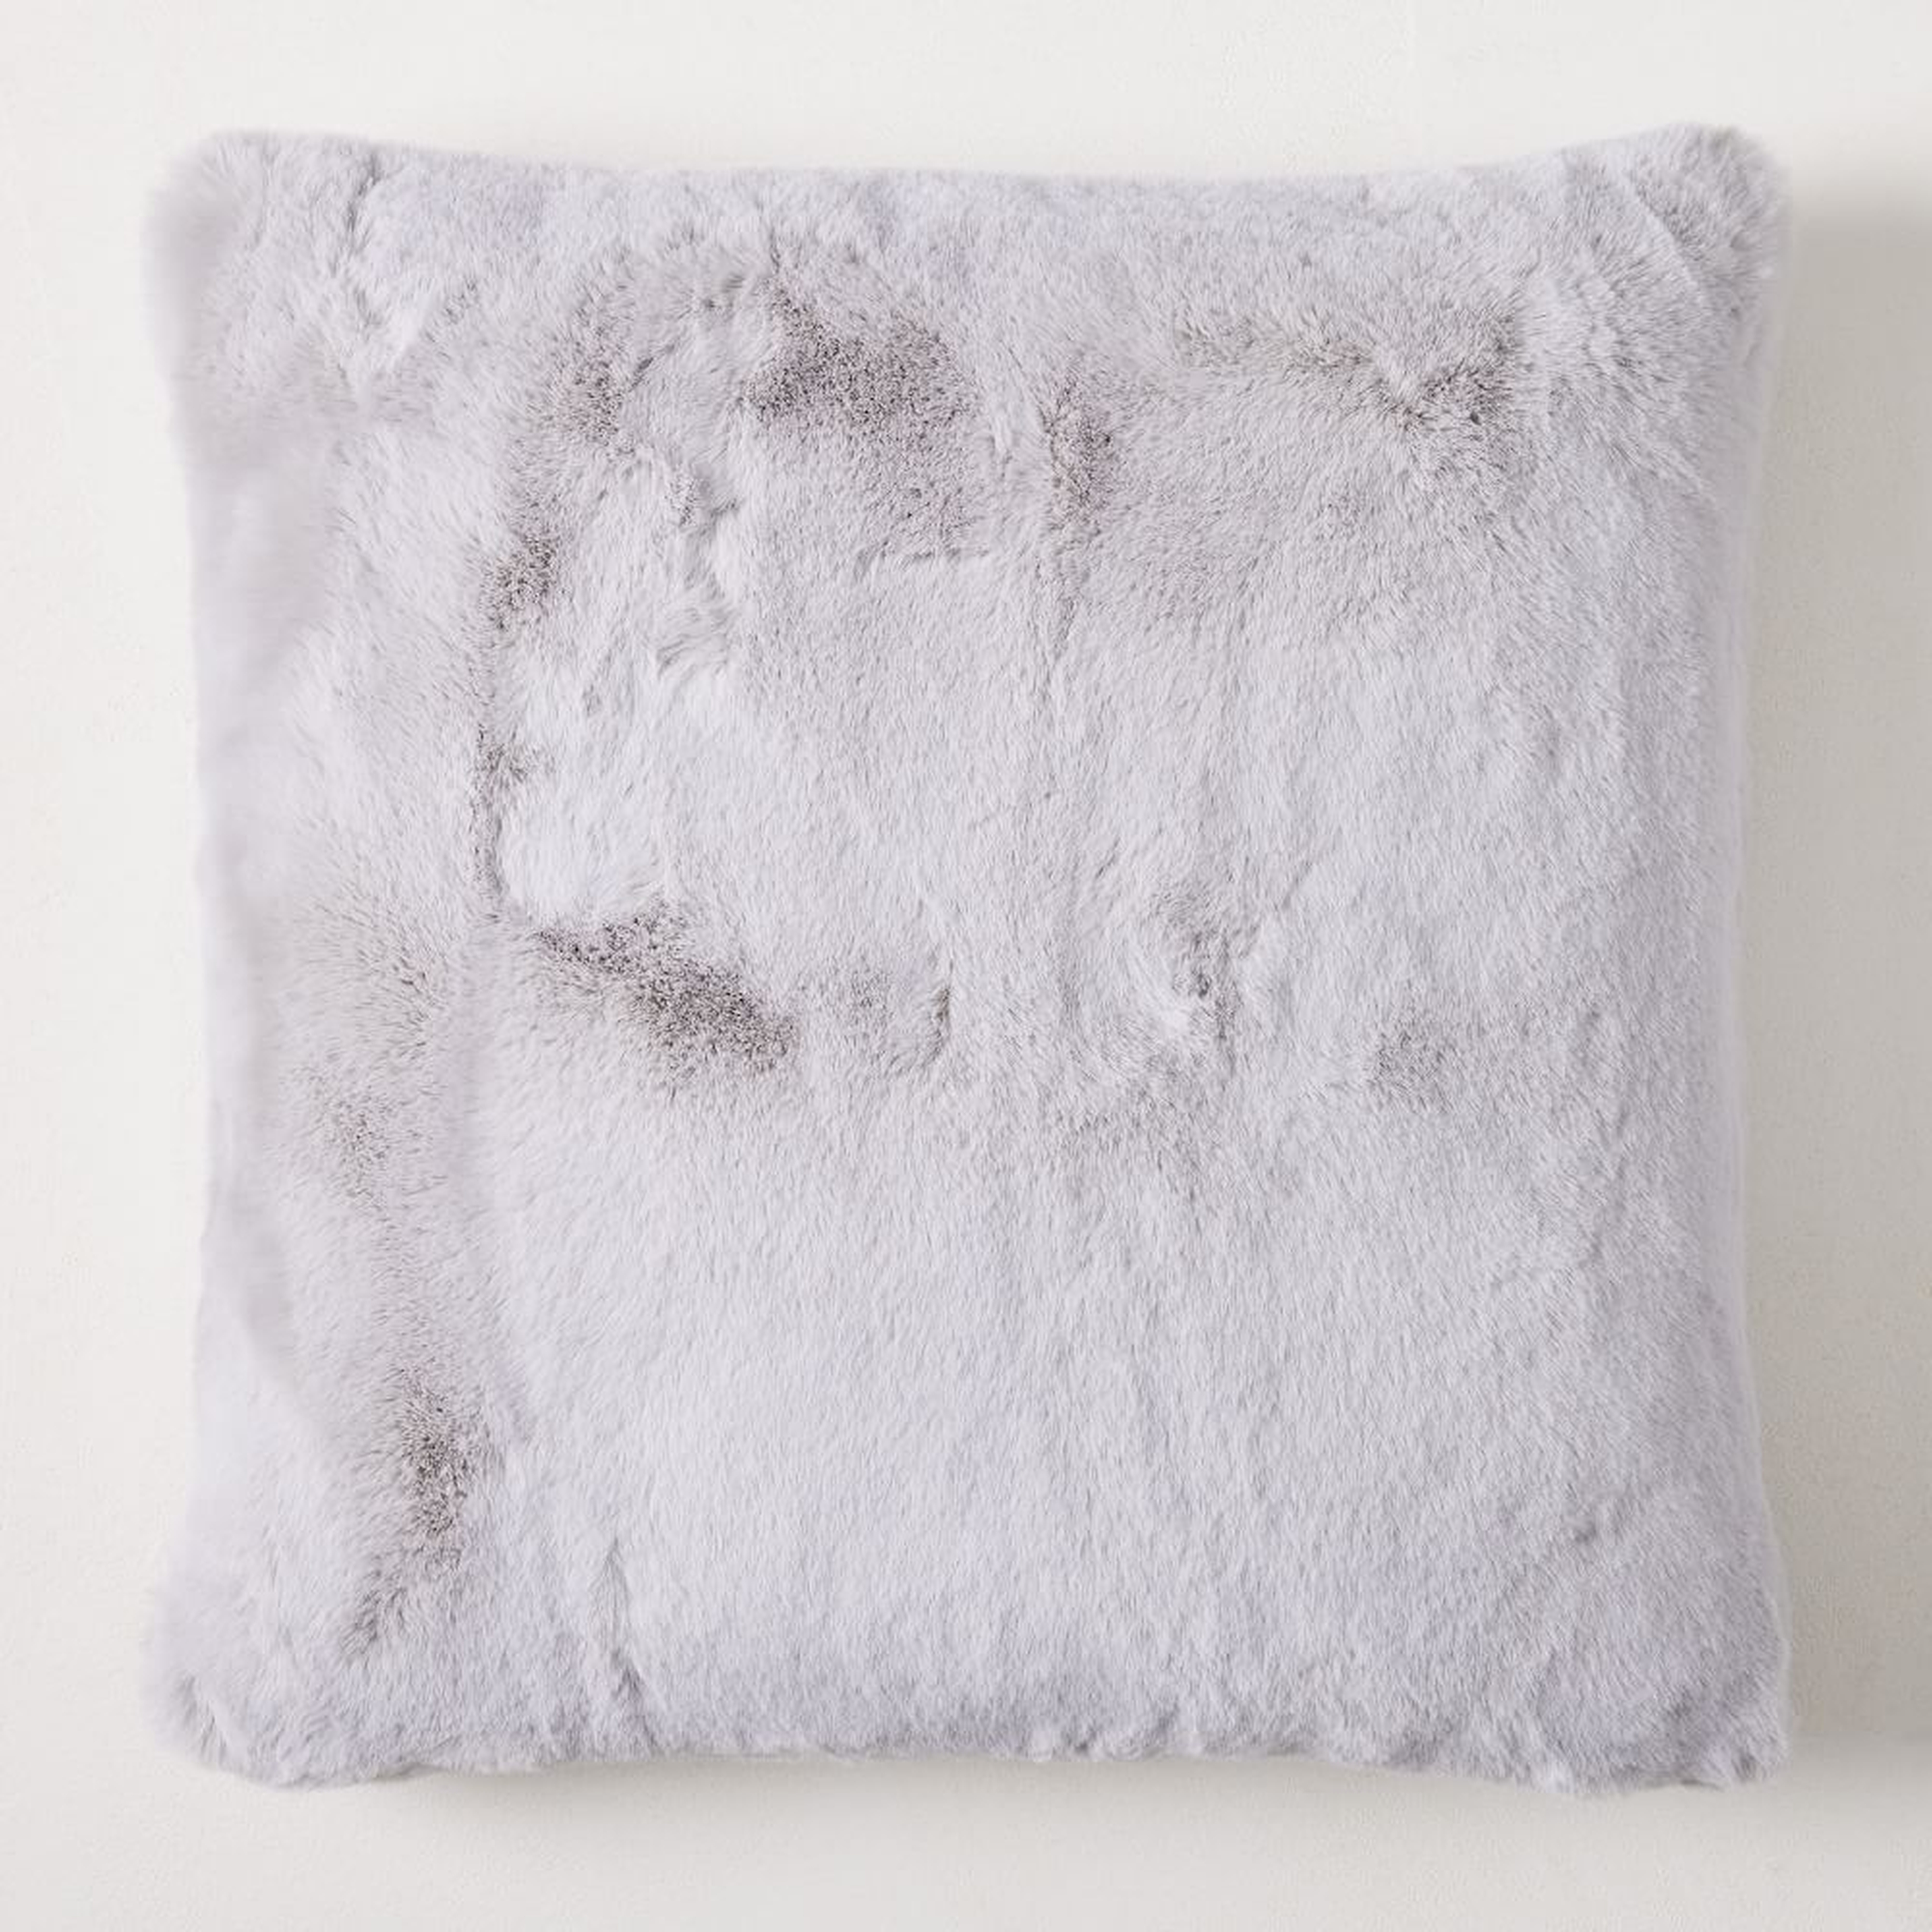 Faux Fur Chinchilla Pillow Cover, 20"x20", Frost Gray - West Elm